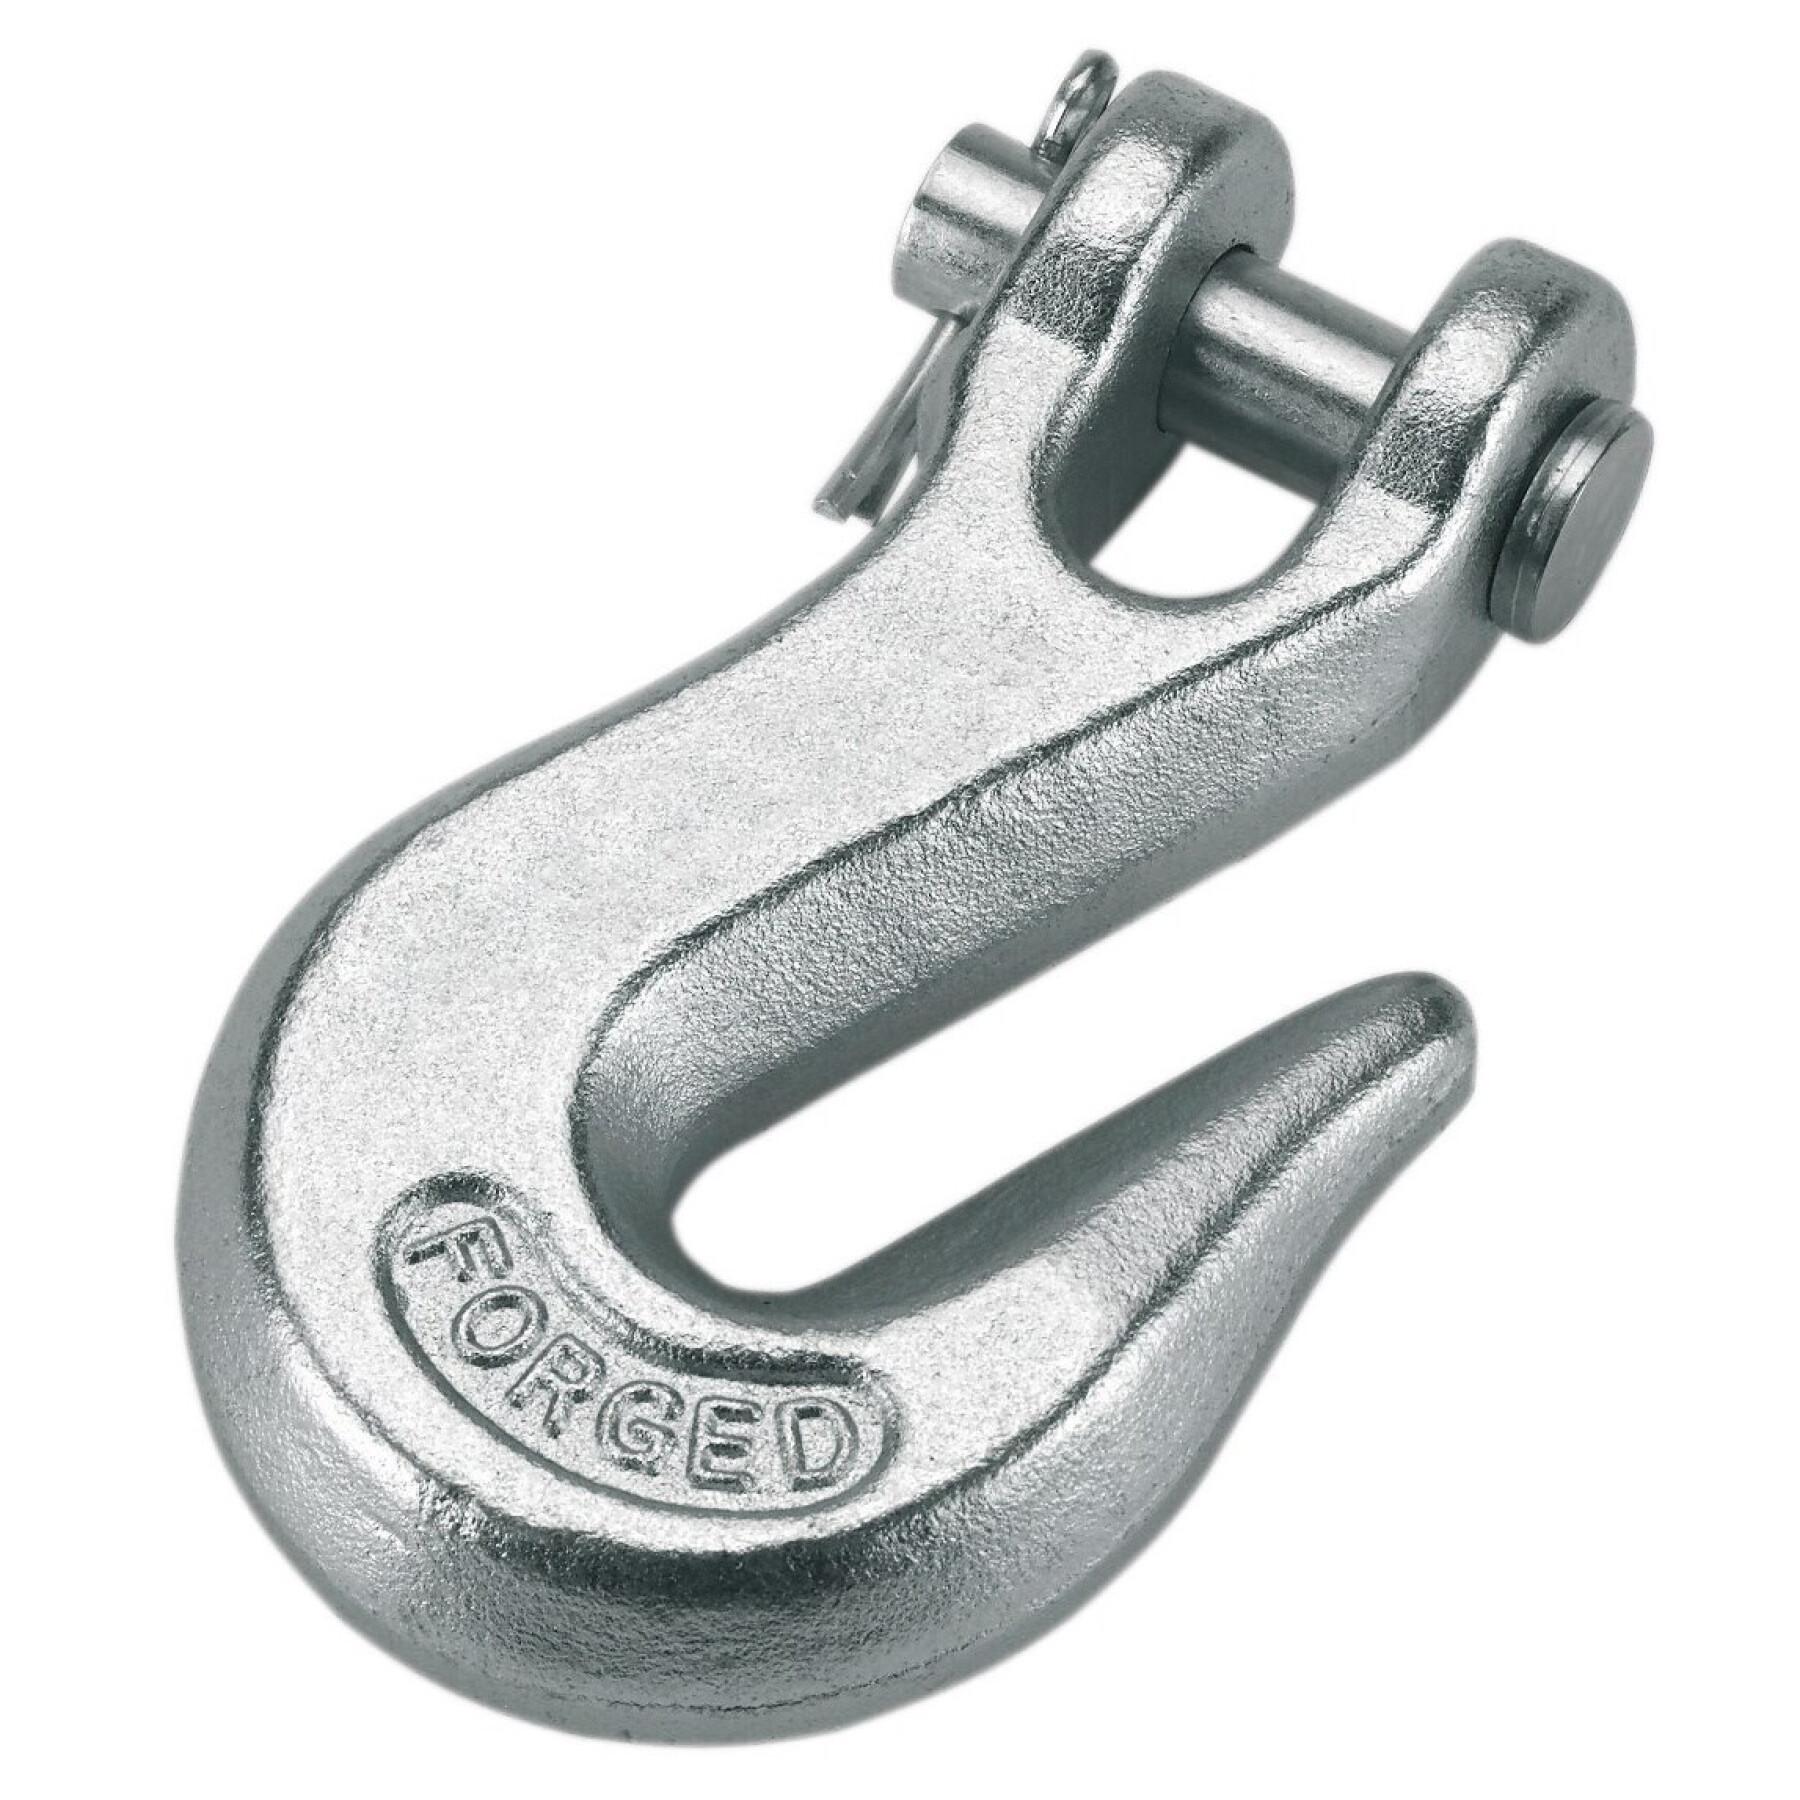 Lifting hook with chain pin - load 1300 kg Kerbl